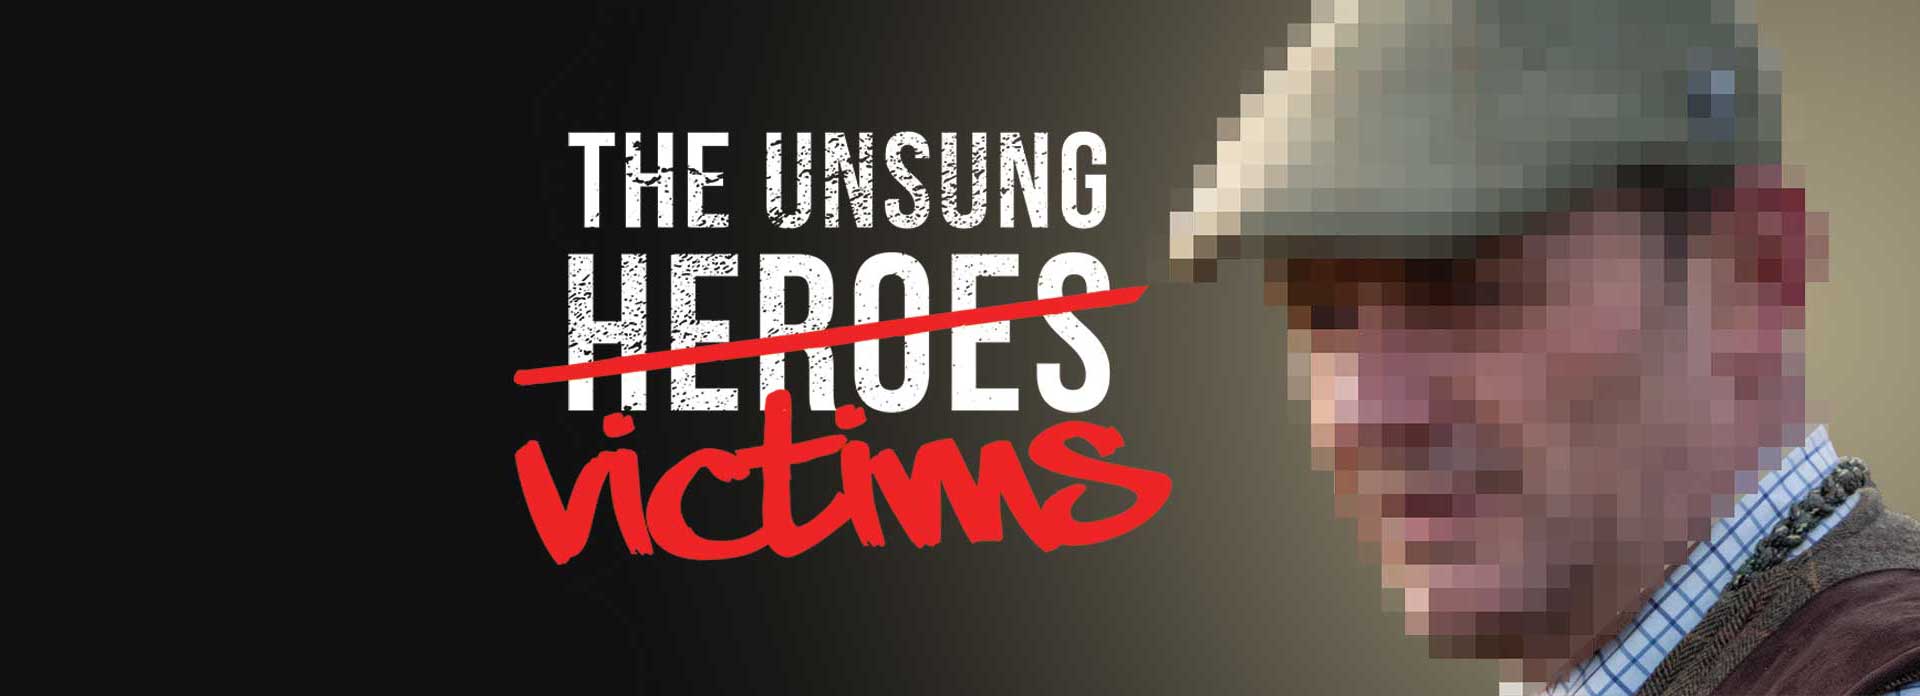 The unsung victims